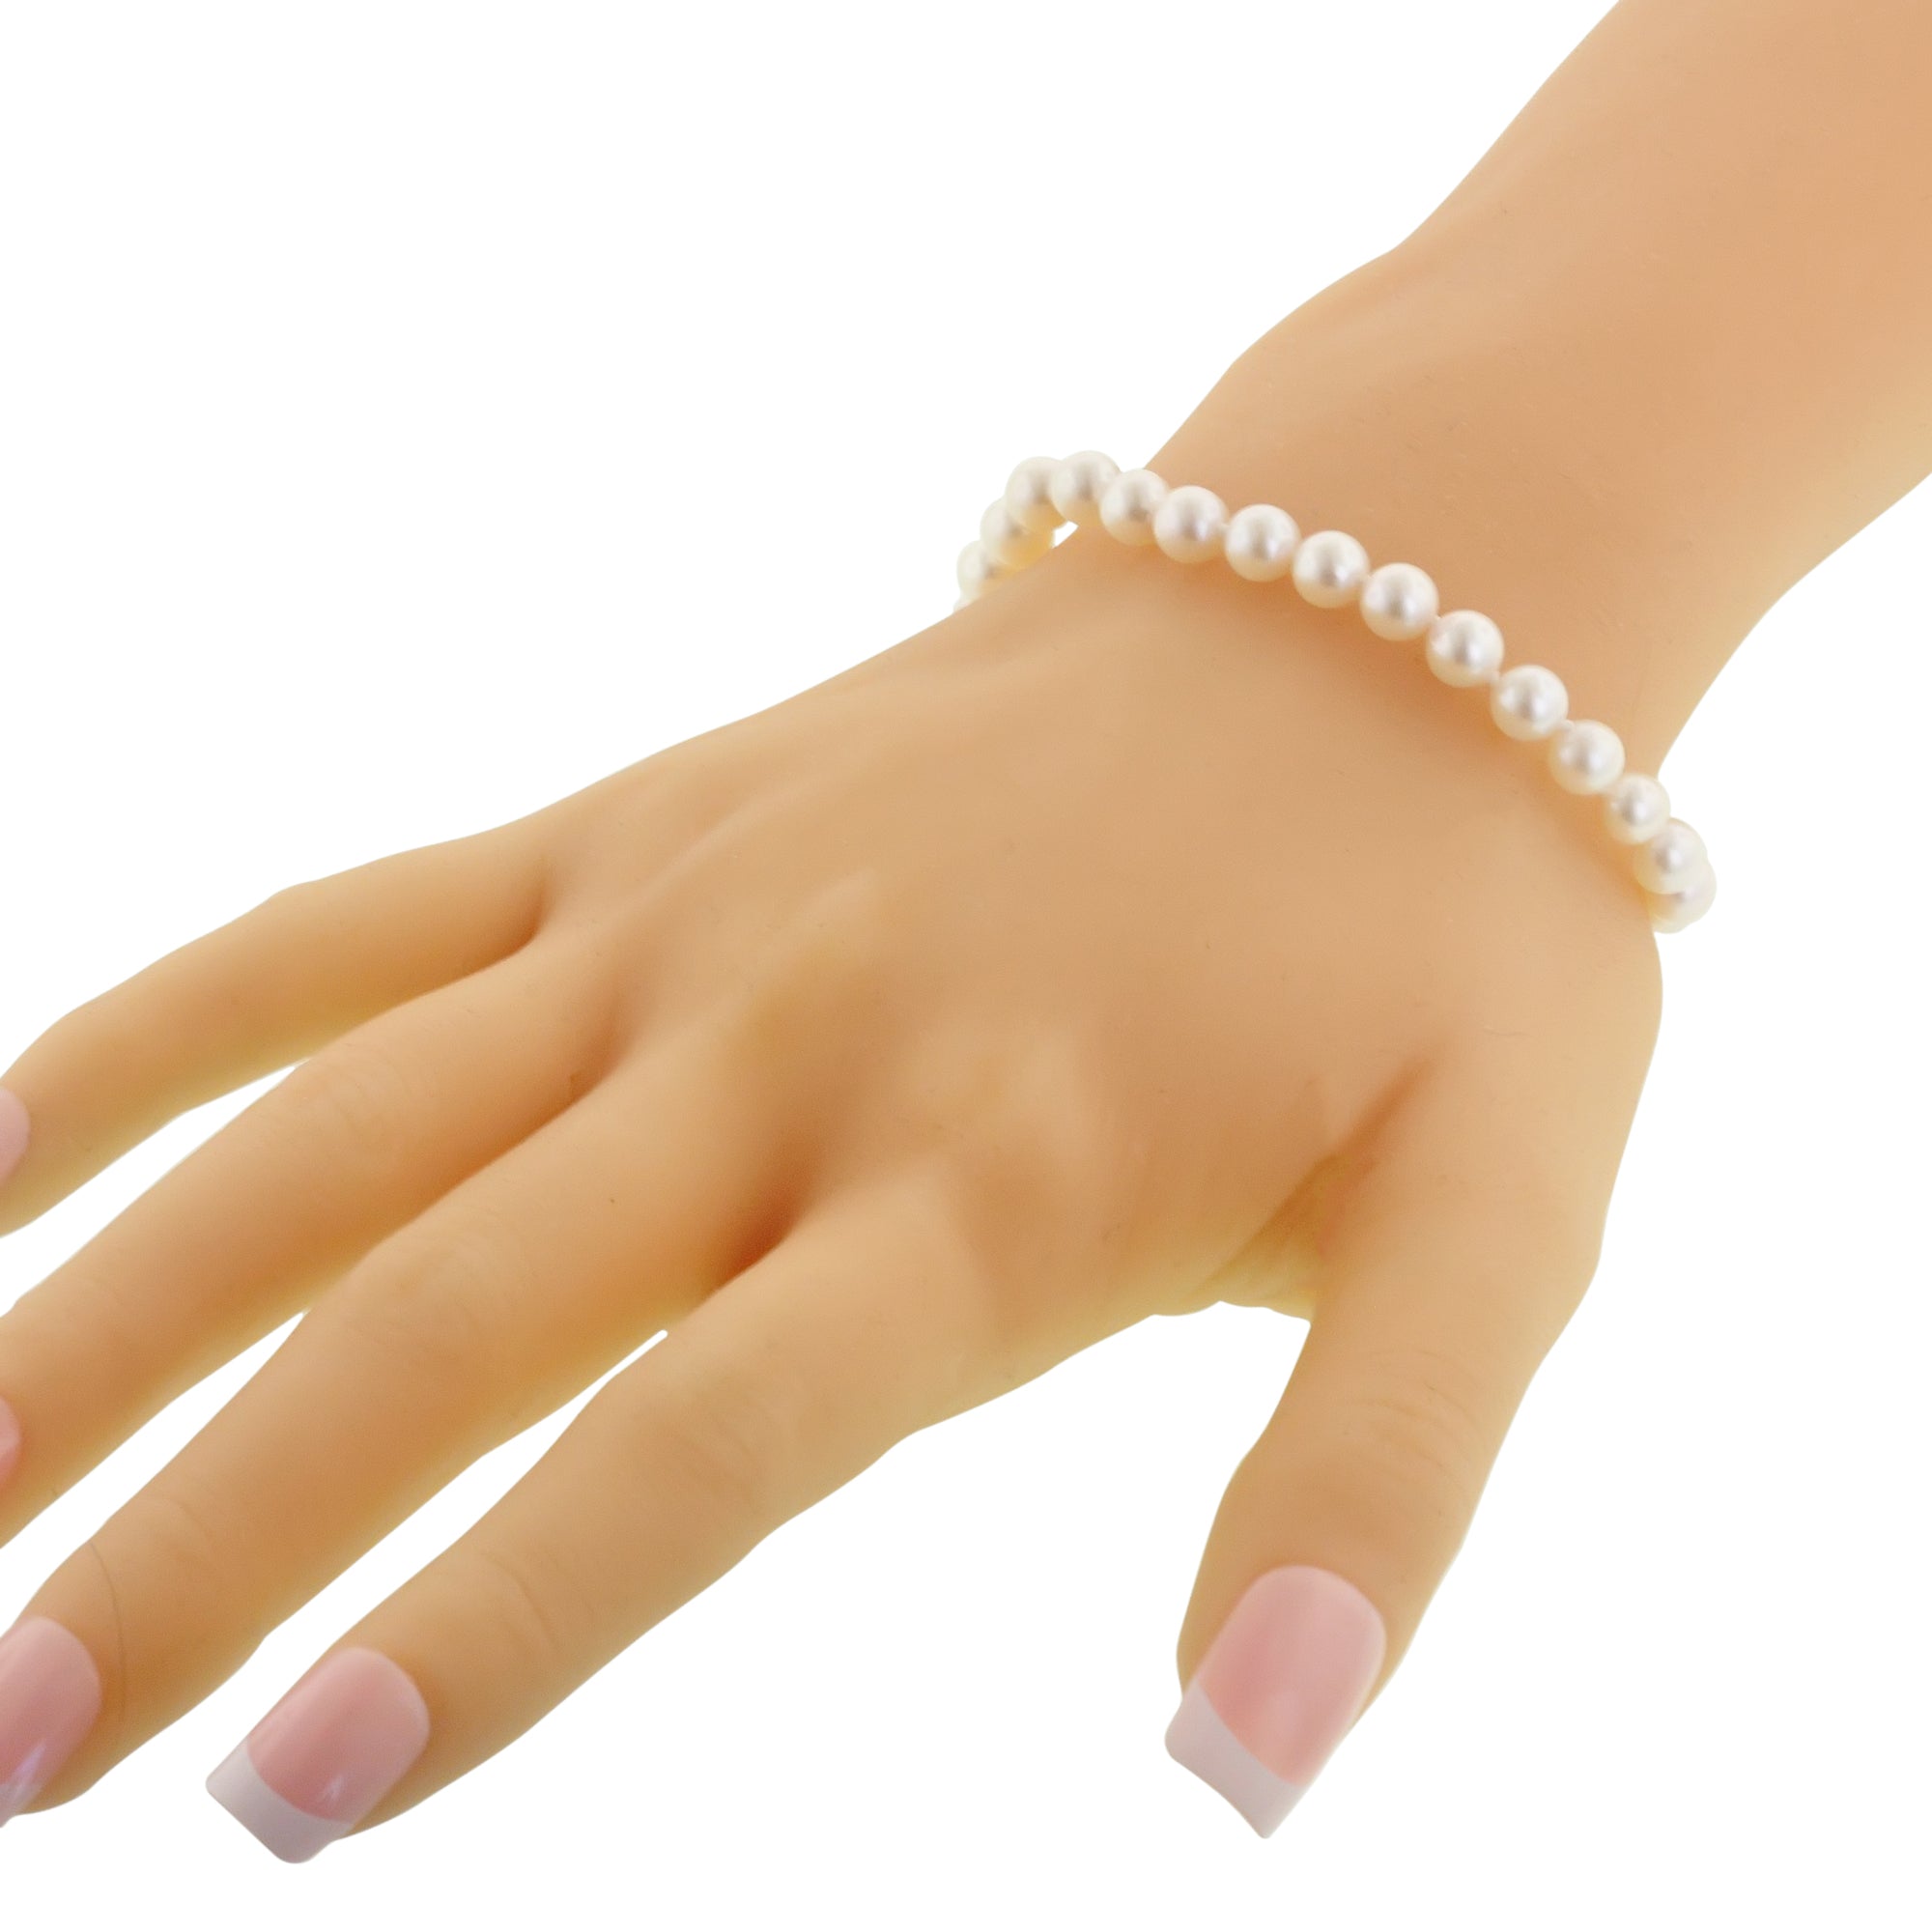 Cultured Akoya Pearl Bracelet in 14kt White Gold (6-6.5mm pearls)